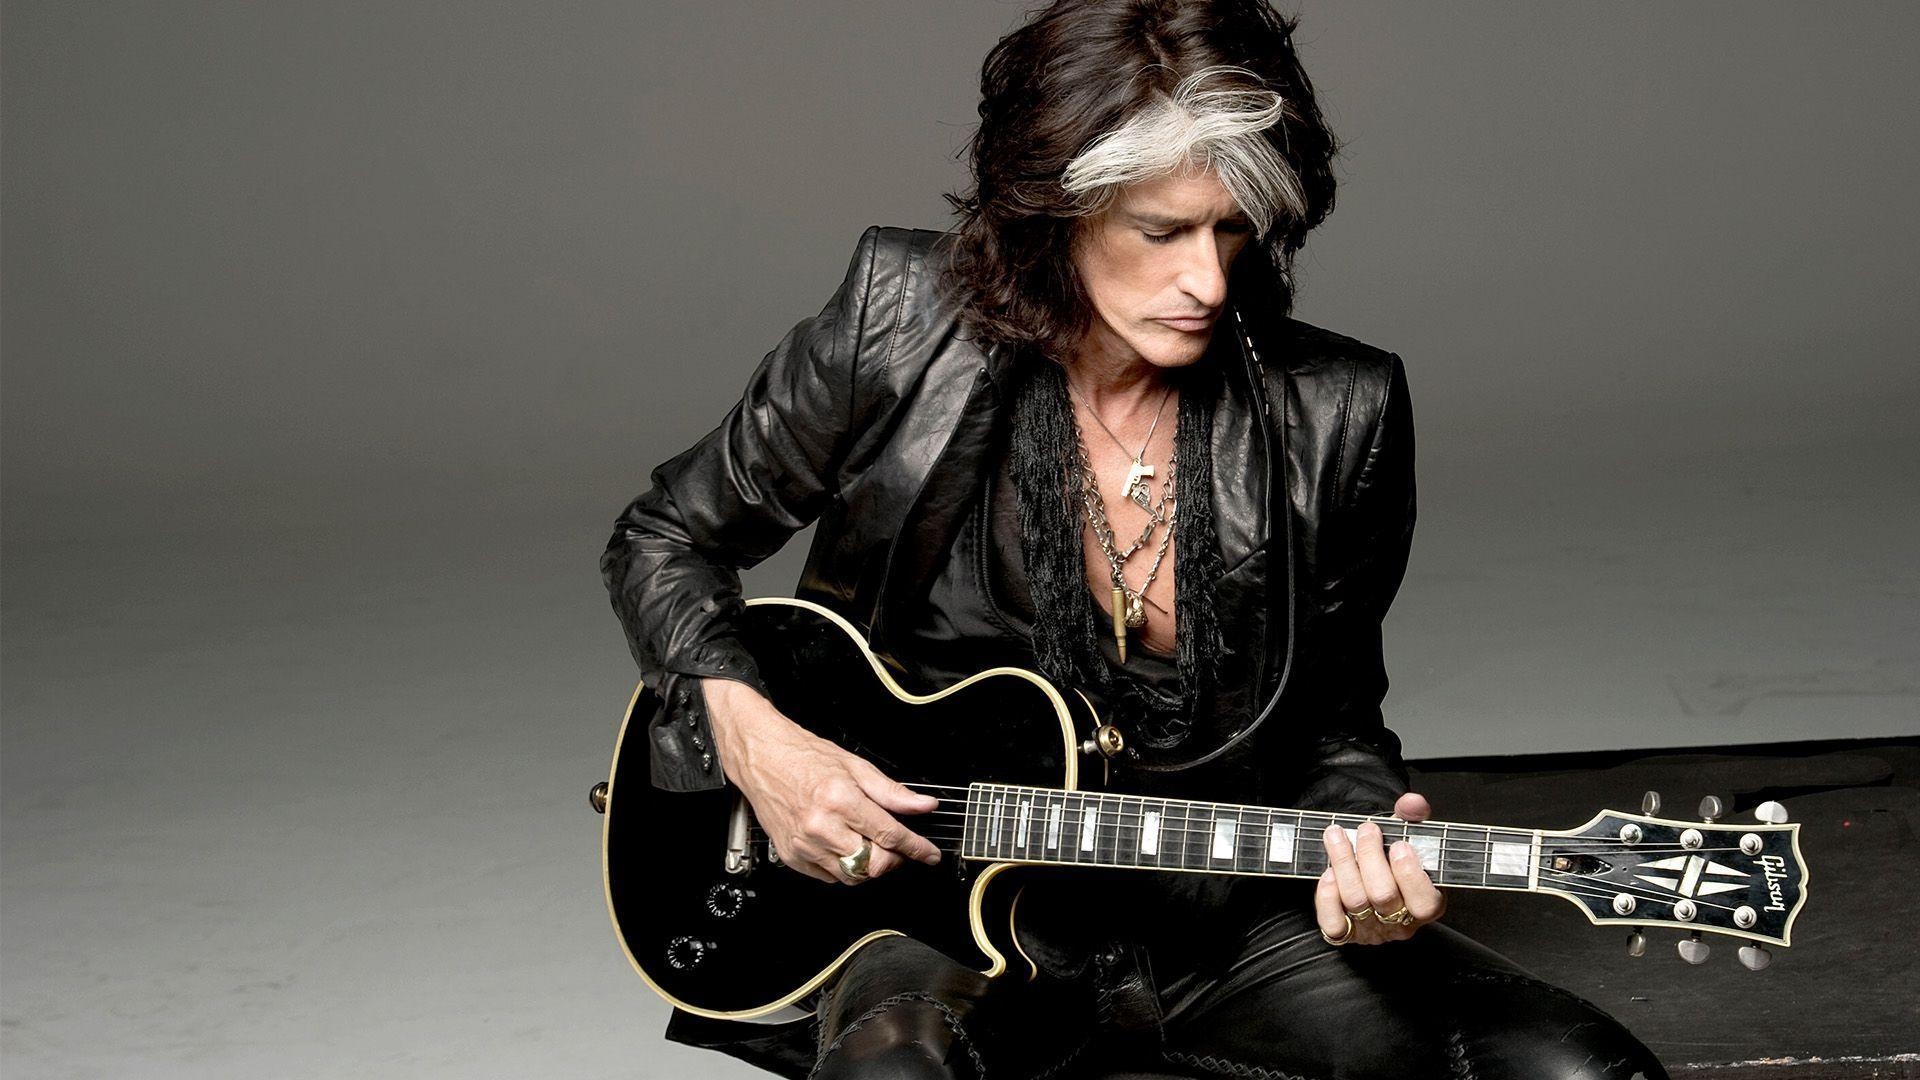 Joe Perry, Wallpapers collection, Free download, 1920x1080 Full HD Desktop